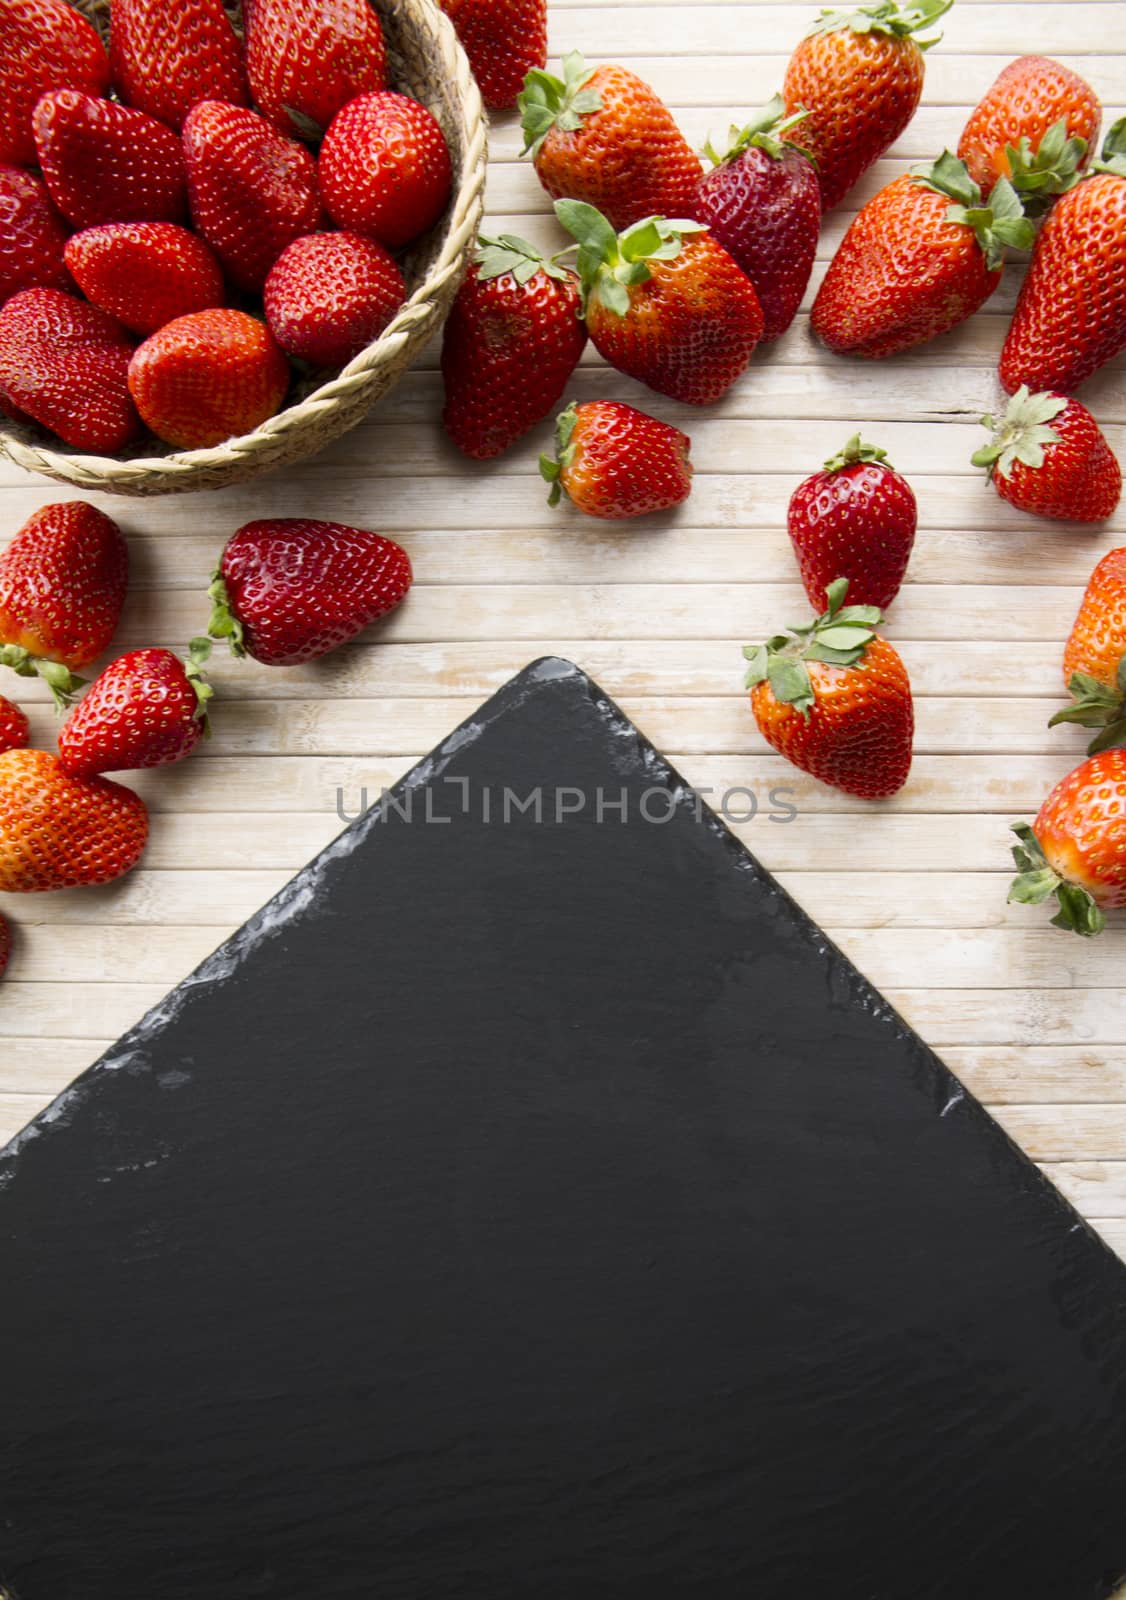 Strawberries copy space with a small basket of strawberries surr by robbyfontanesi